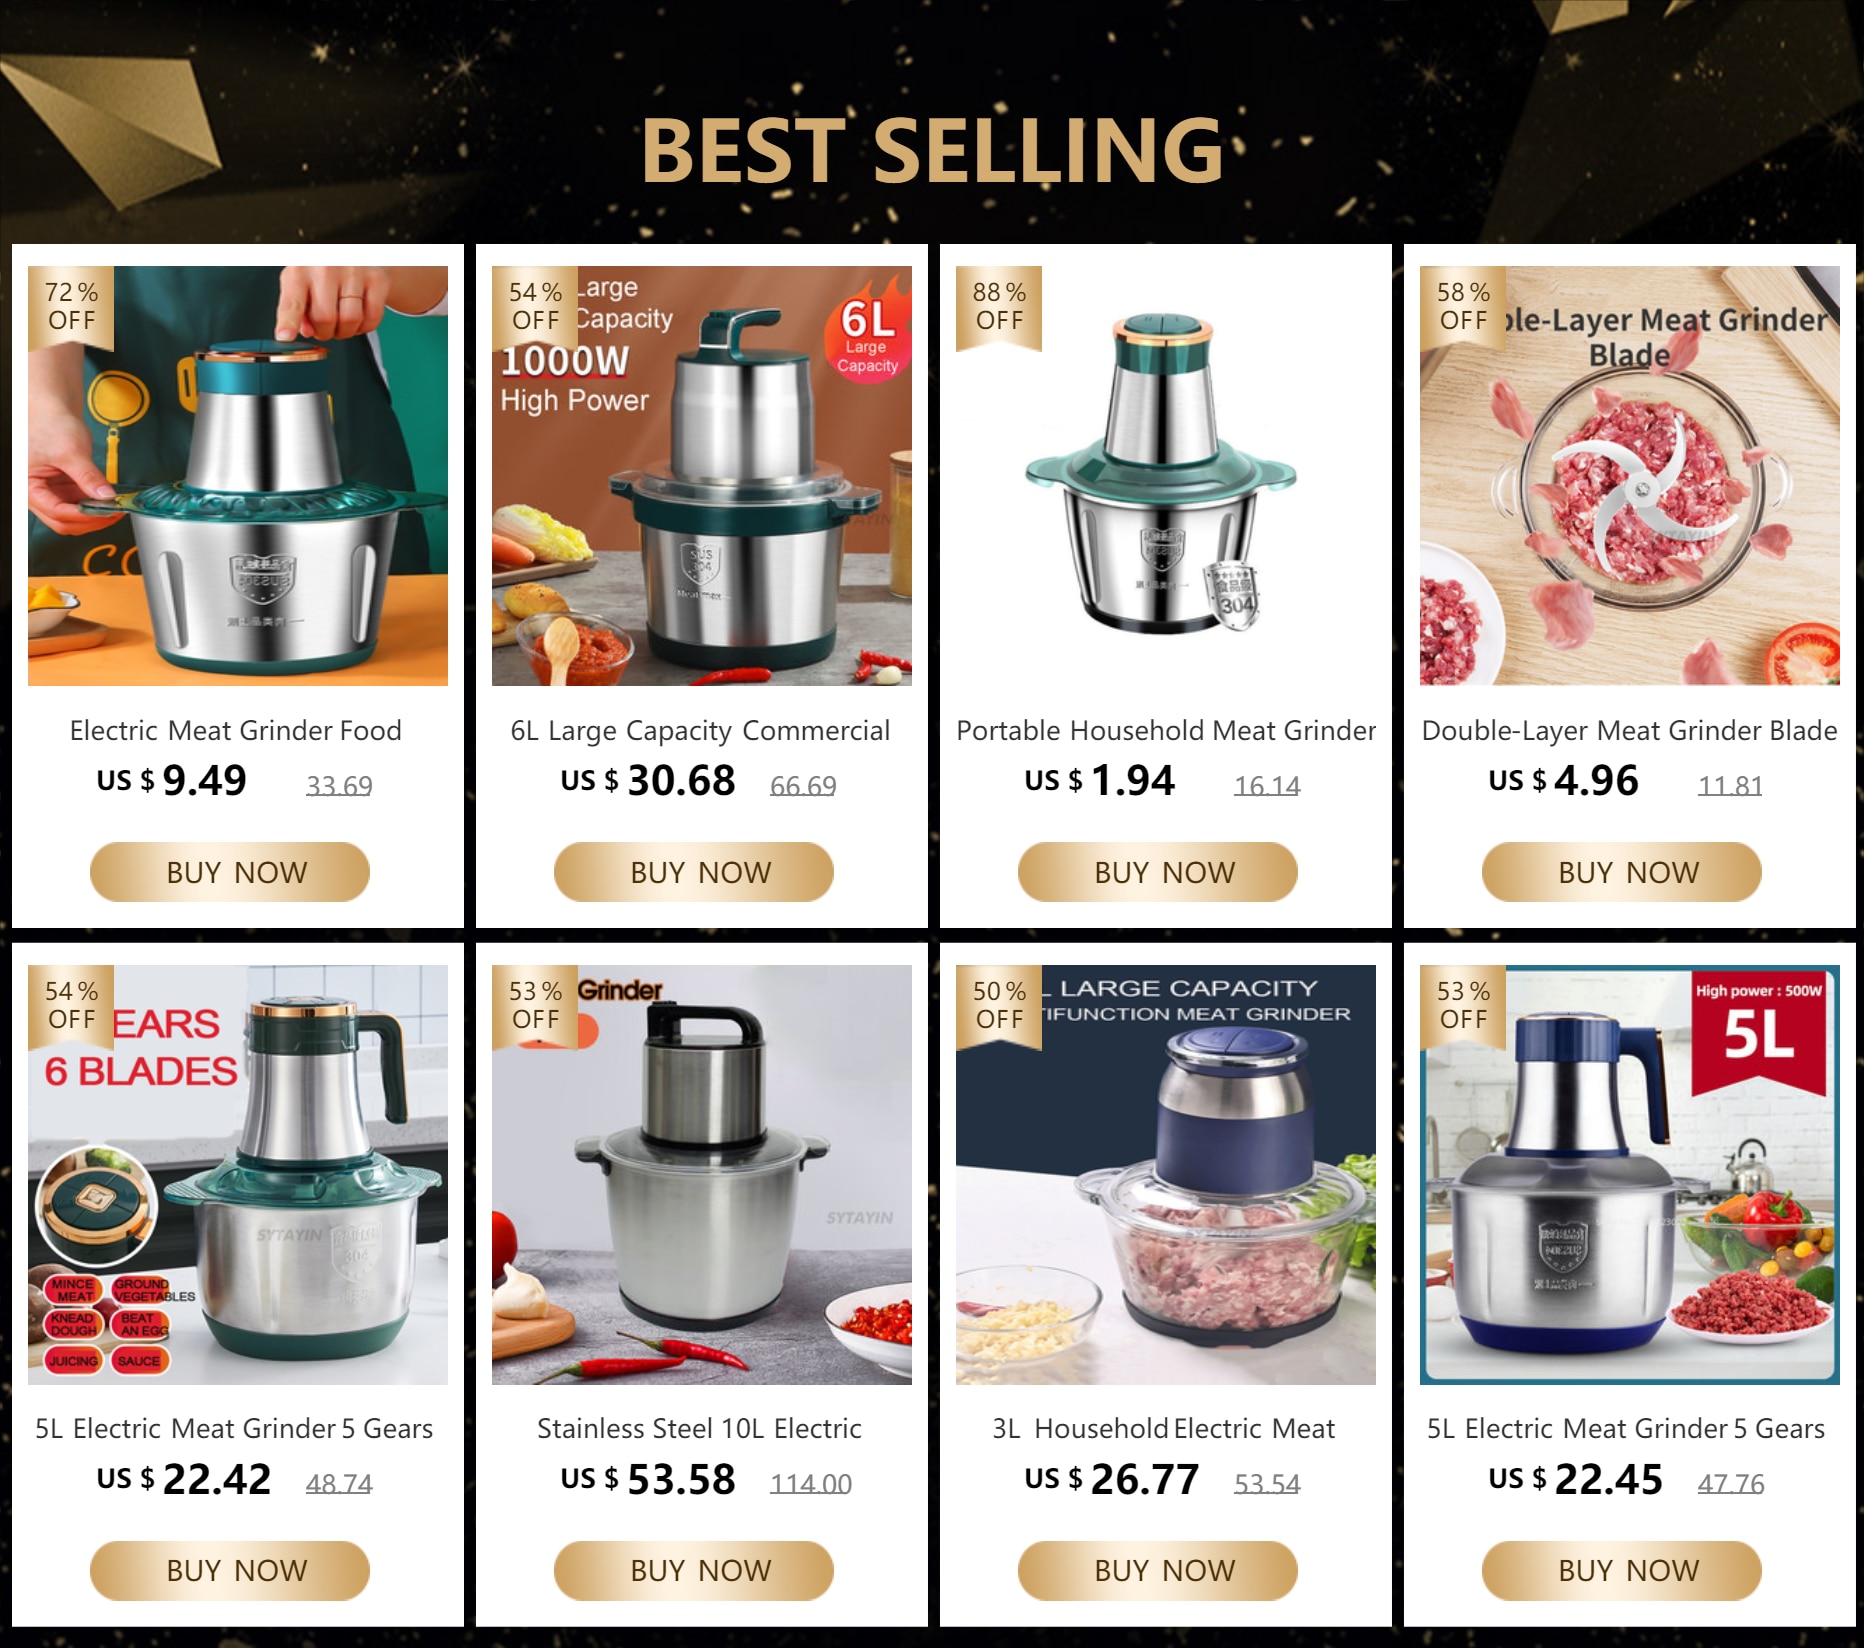 5L Electric Meat Grinder 5 Gears Stainless Steel Electric Chopper